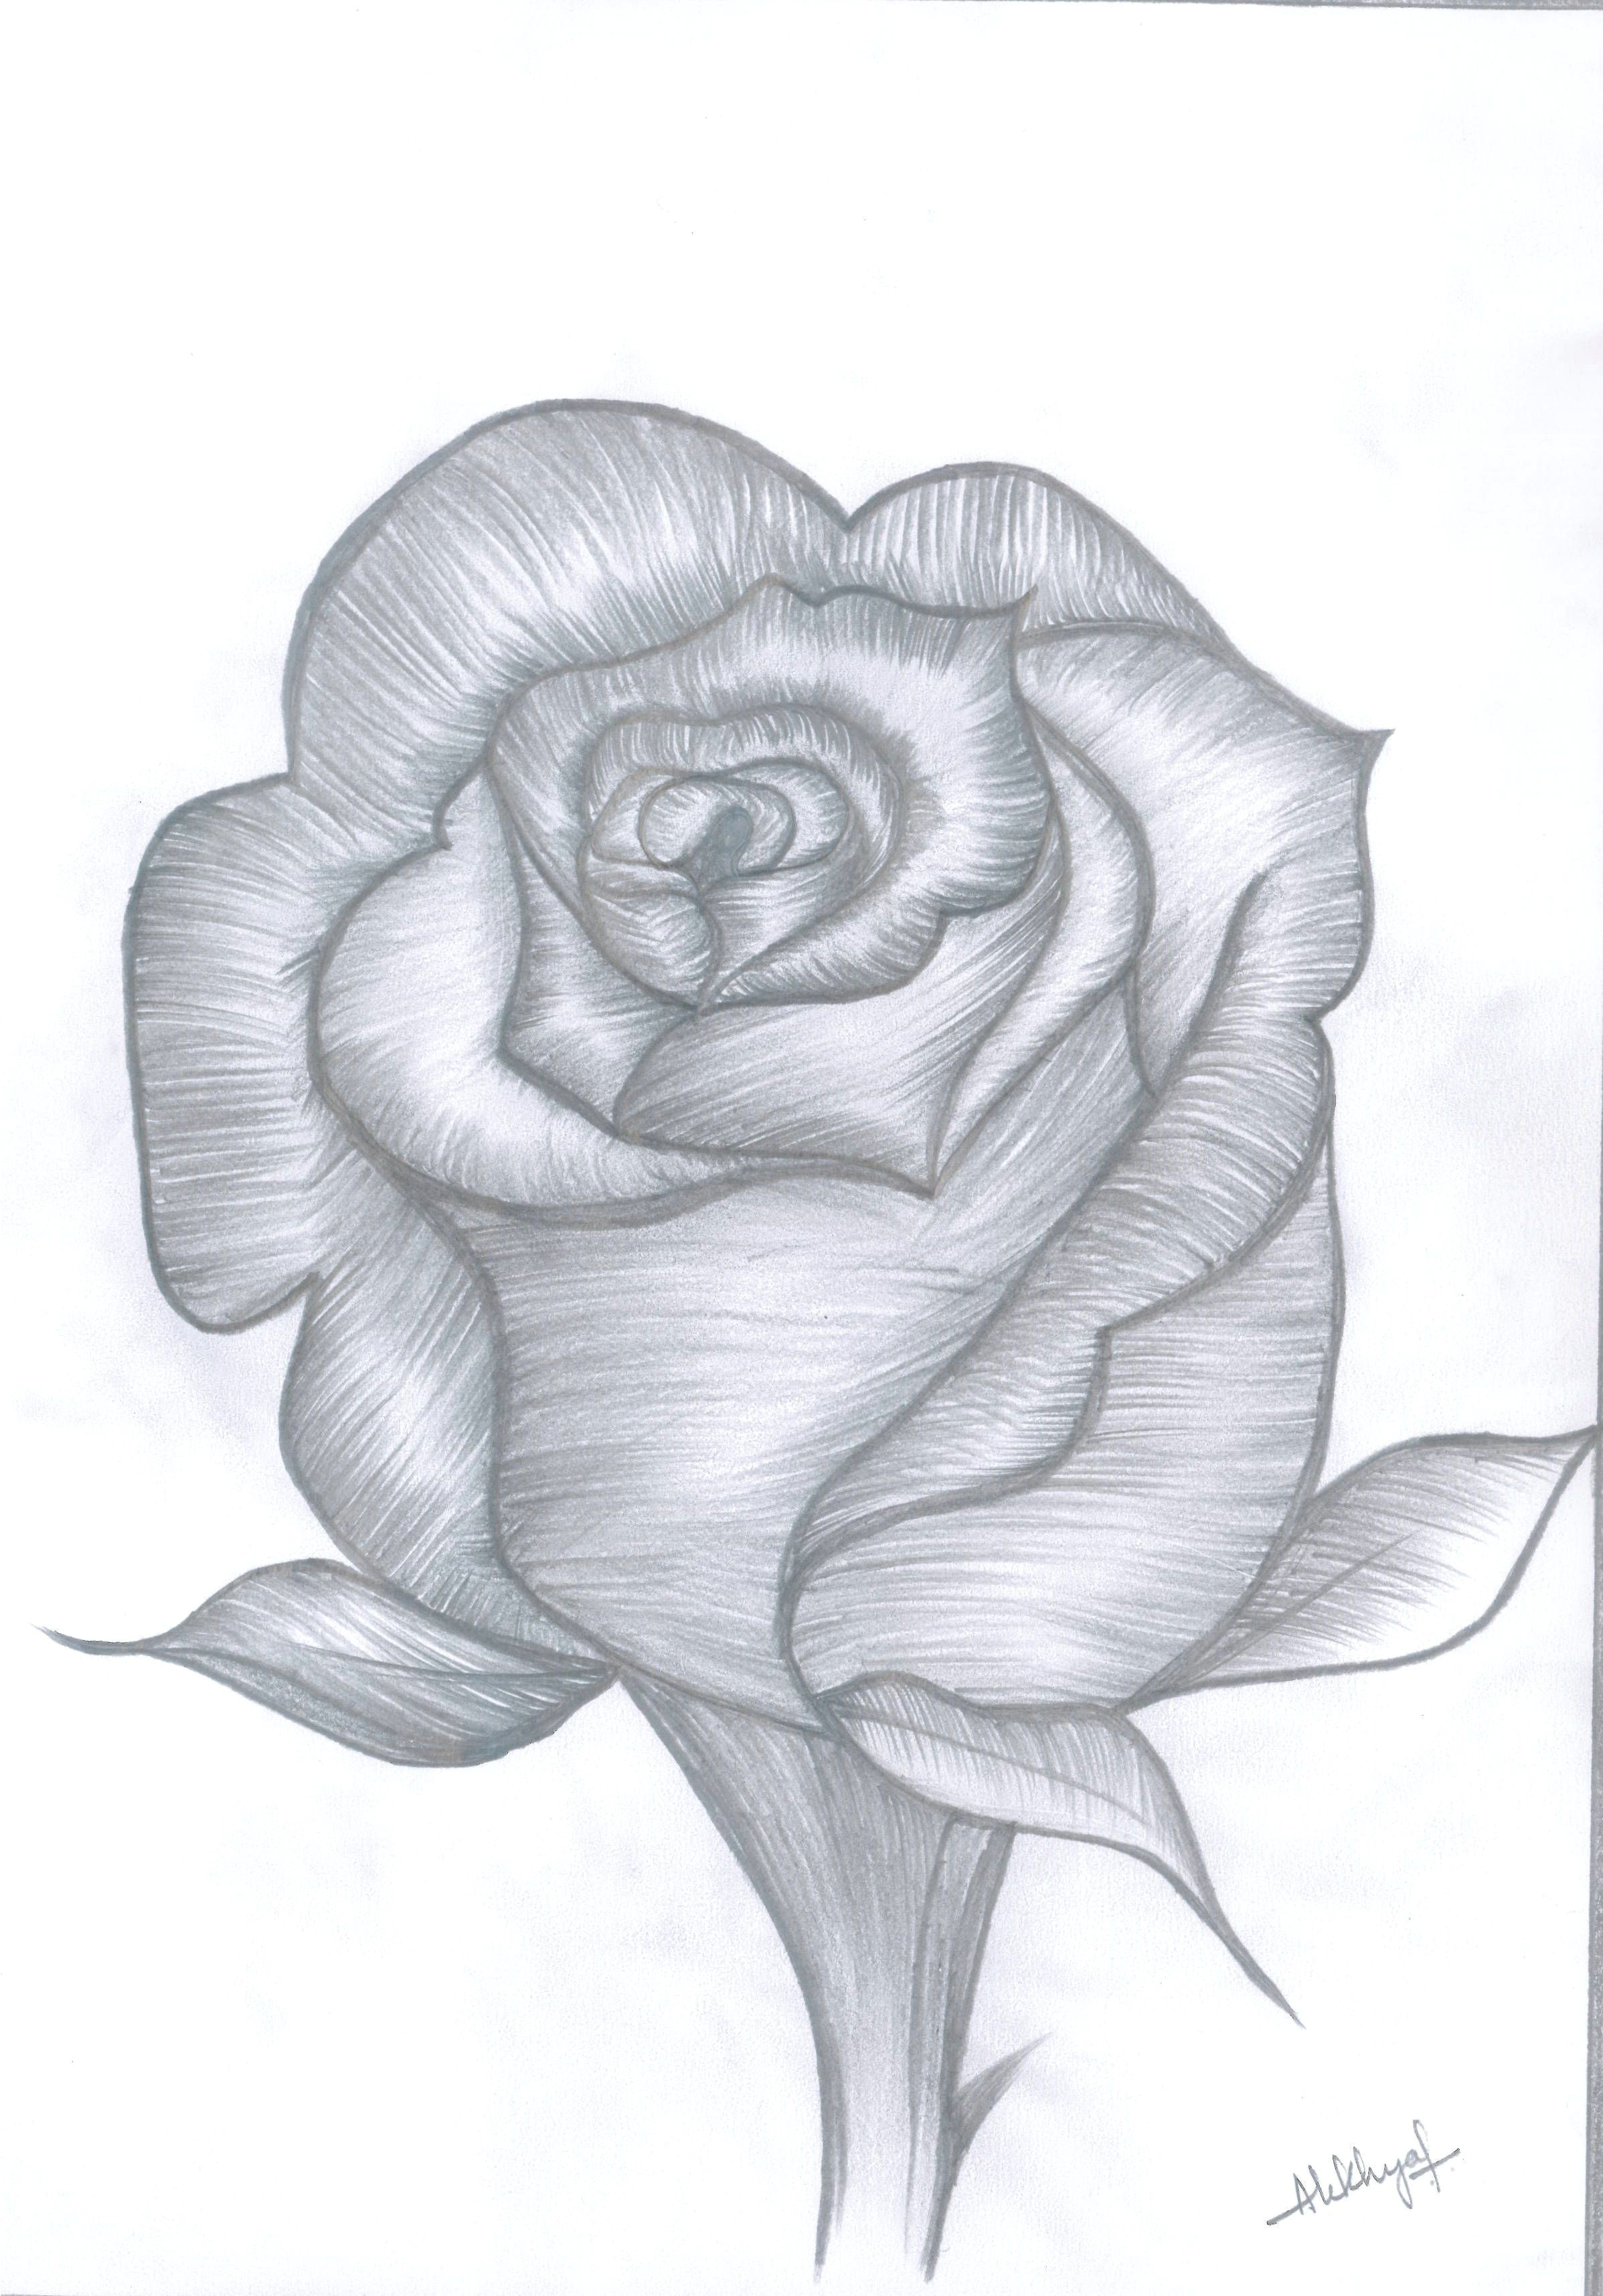 Drawing Of Rose Bud Rose Bud Drawings In 2018 Pinterest Draw Rose Buds and Pencil